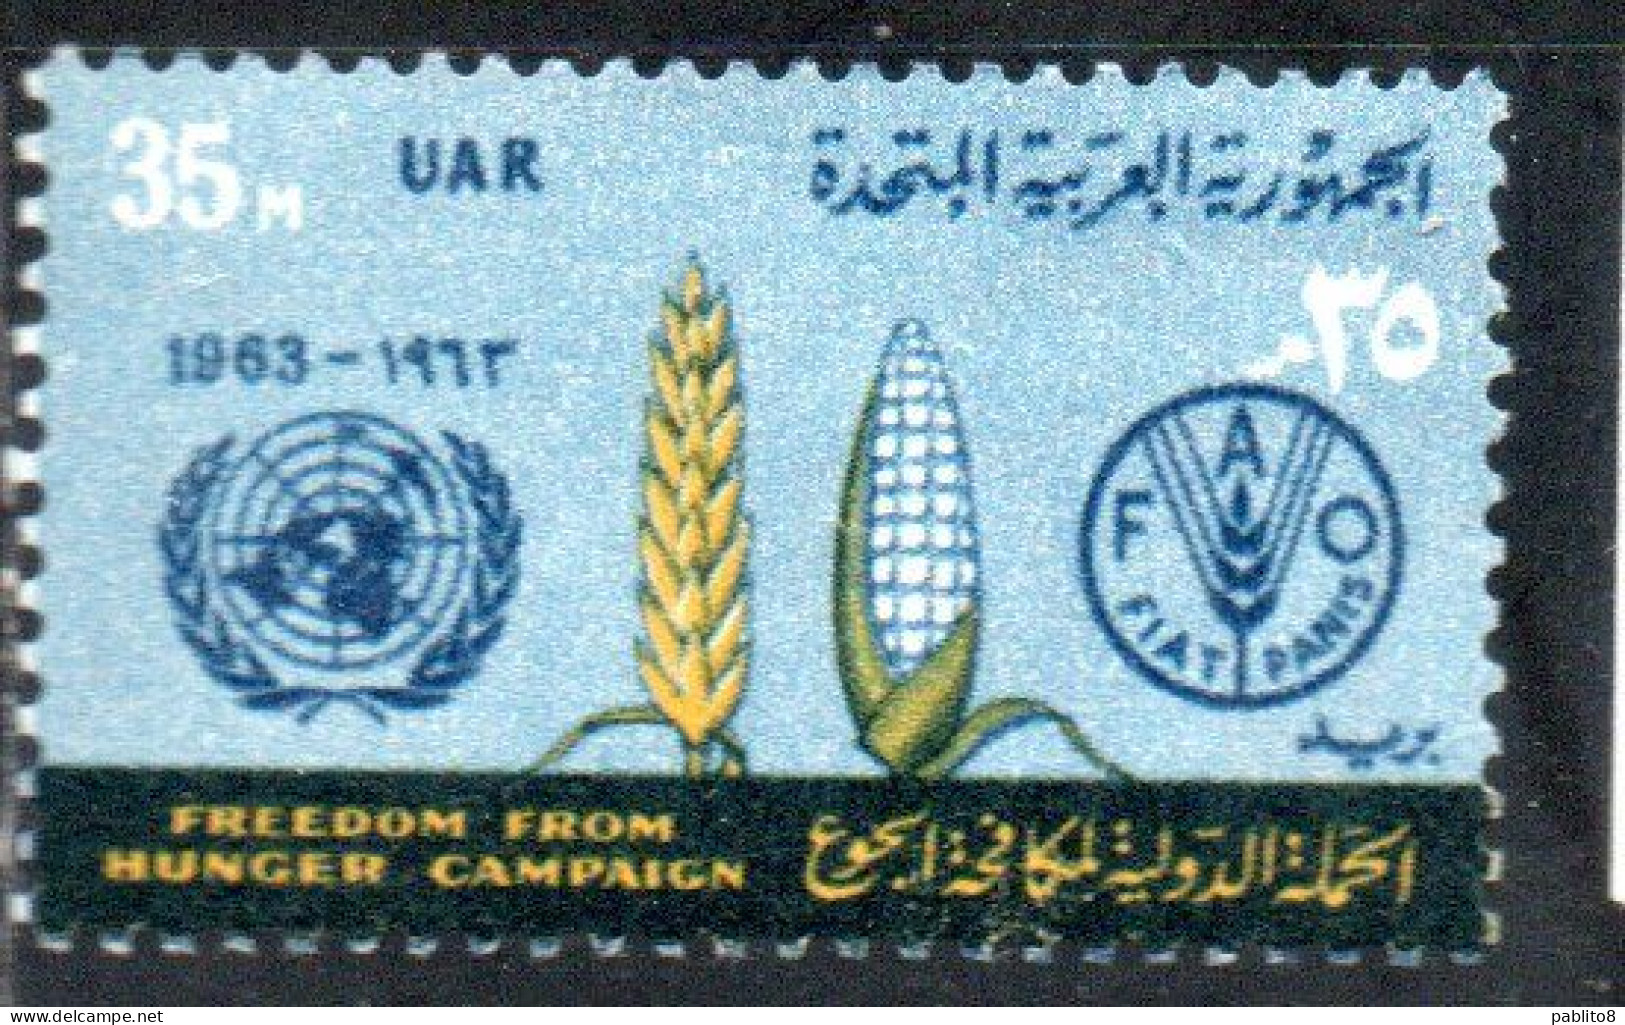 UAR EGYPT EGITTO 1963 FAO FREEDOM FROM HUNGER CAMPAIGN WHEAT CORN AND EMBLEMS 35m  MNH - Ungebraucht